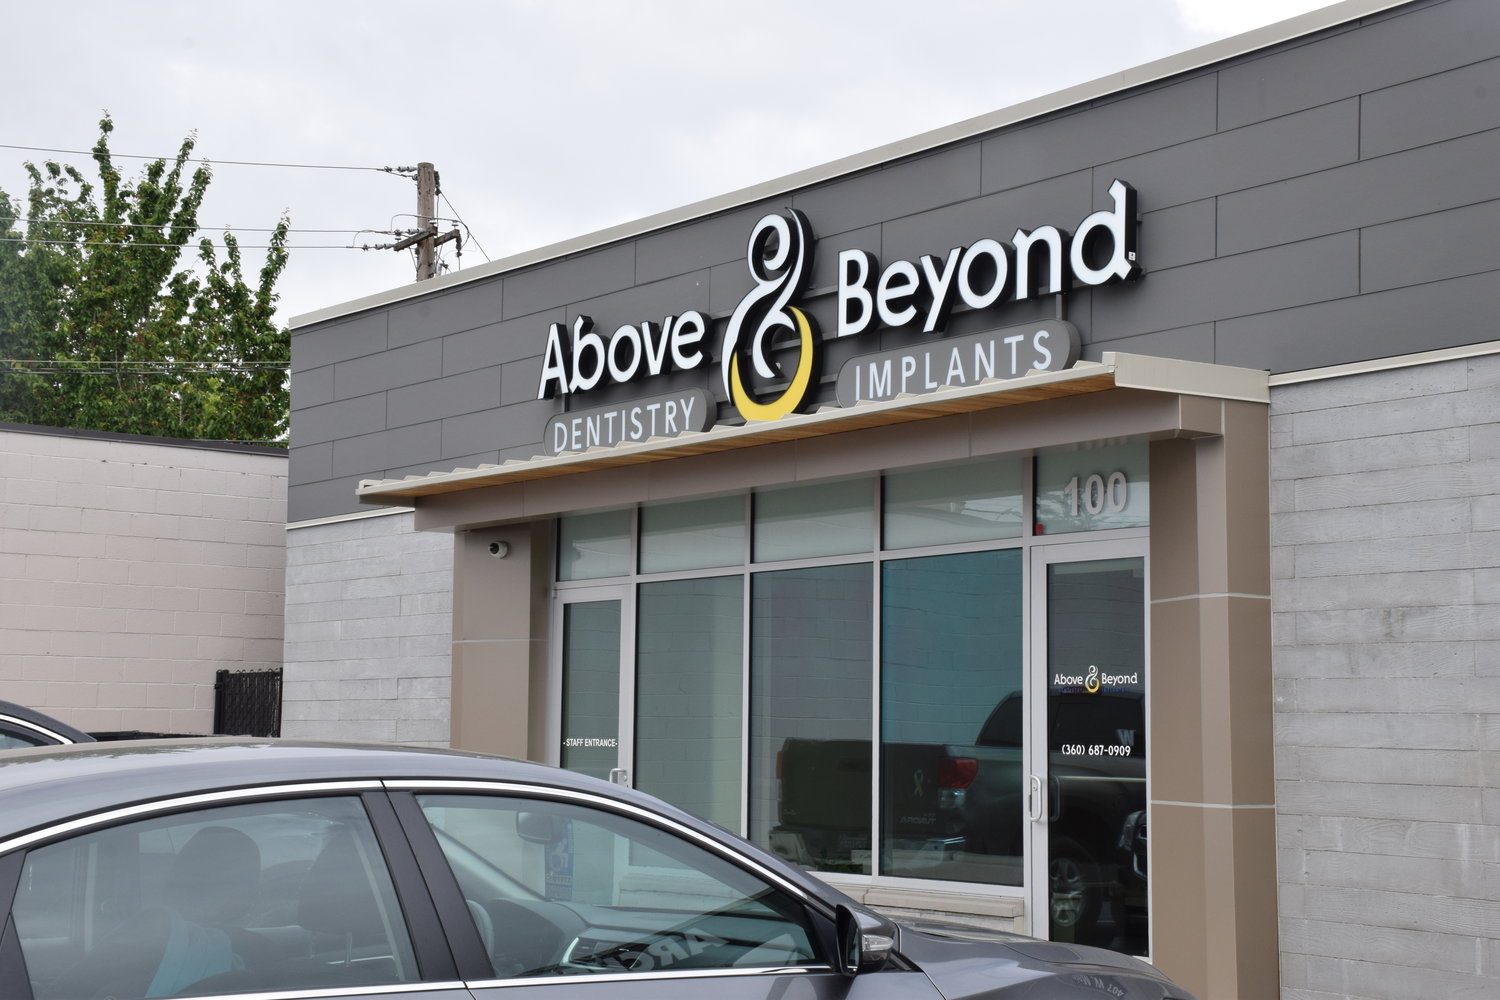 Above and Beyond Dentistry & Implants’ back entrance sits off of W. 1st St. in Battle Ground May 20.